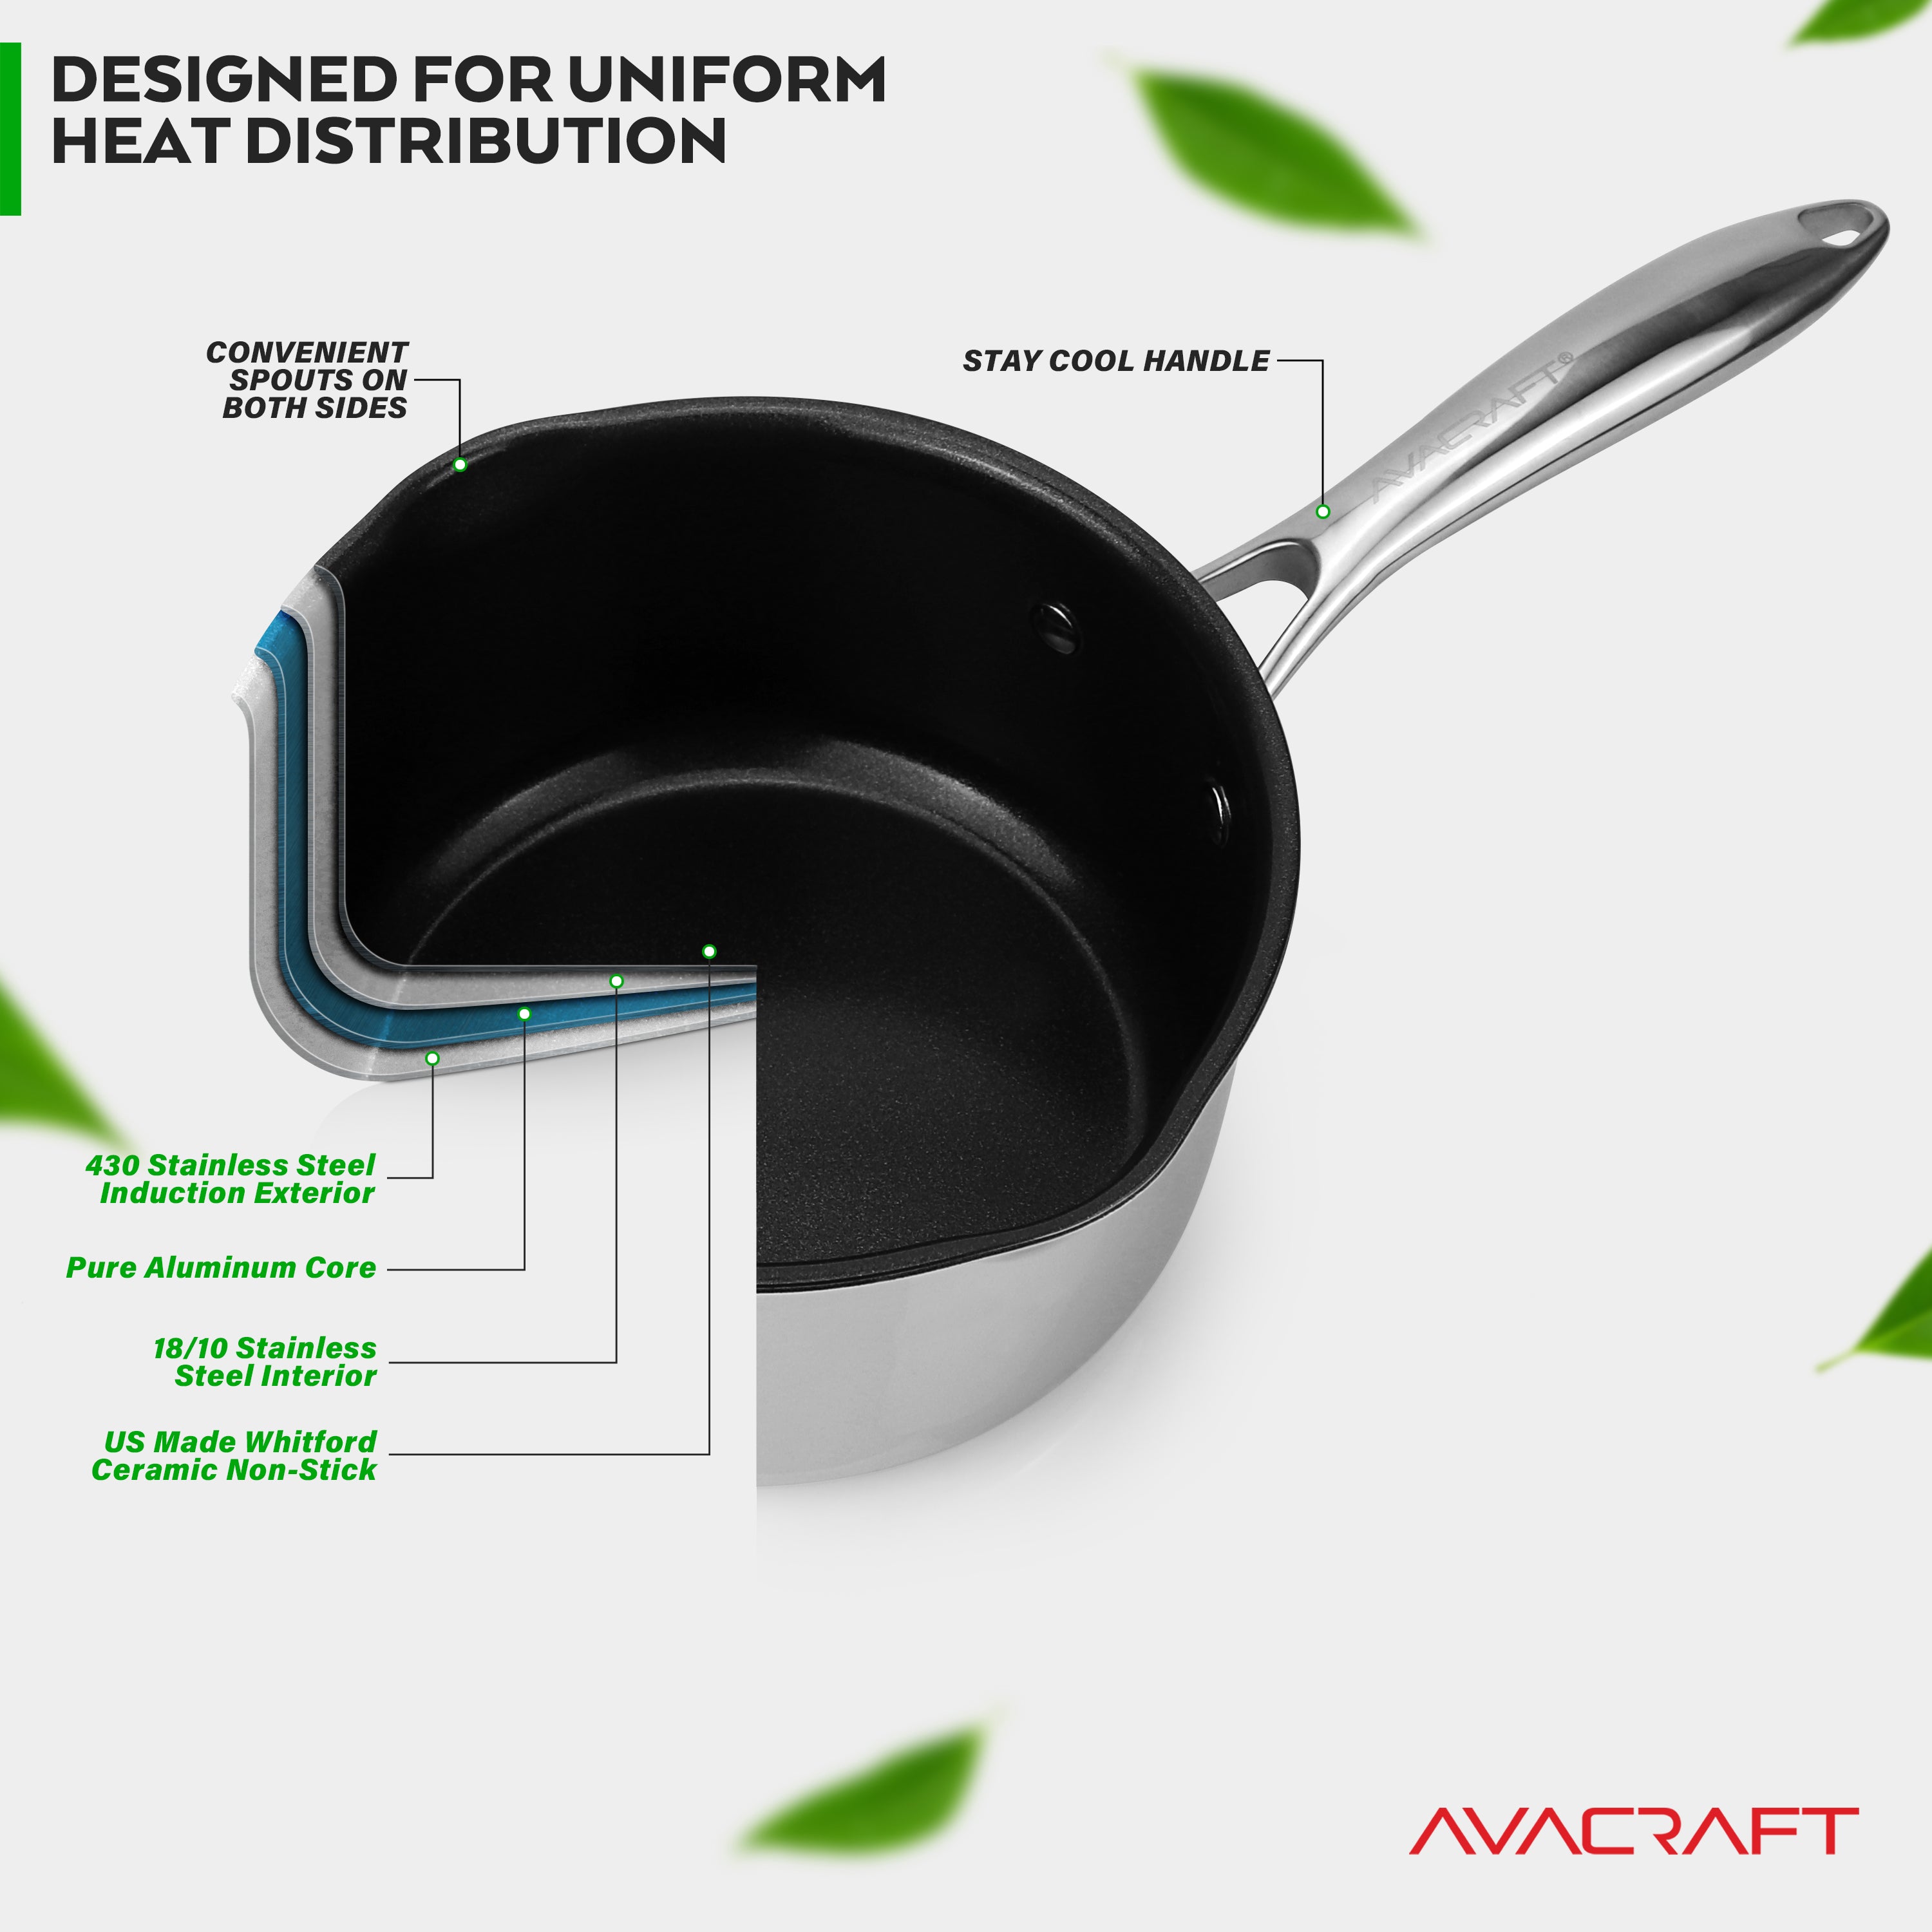 AVACRAFT Nonstick Saucepan with Glass Lid, Strainer Lid, 100% PTFE, PFOA Toxins Free, Two Side Spouts for Easy Pour, Multipurpose Sauce Pan with Lid, Ceramic Sauce Pot, 2.5 QT